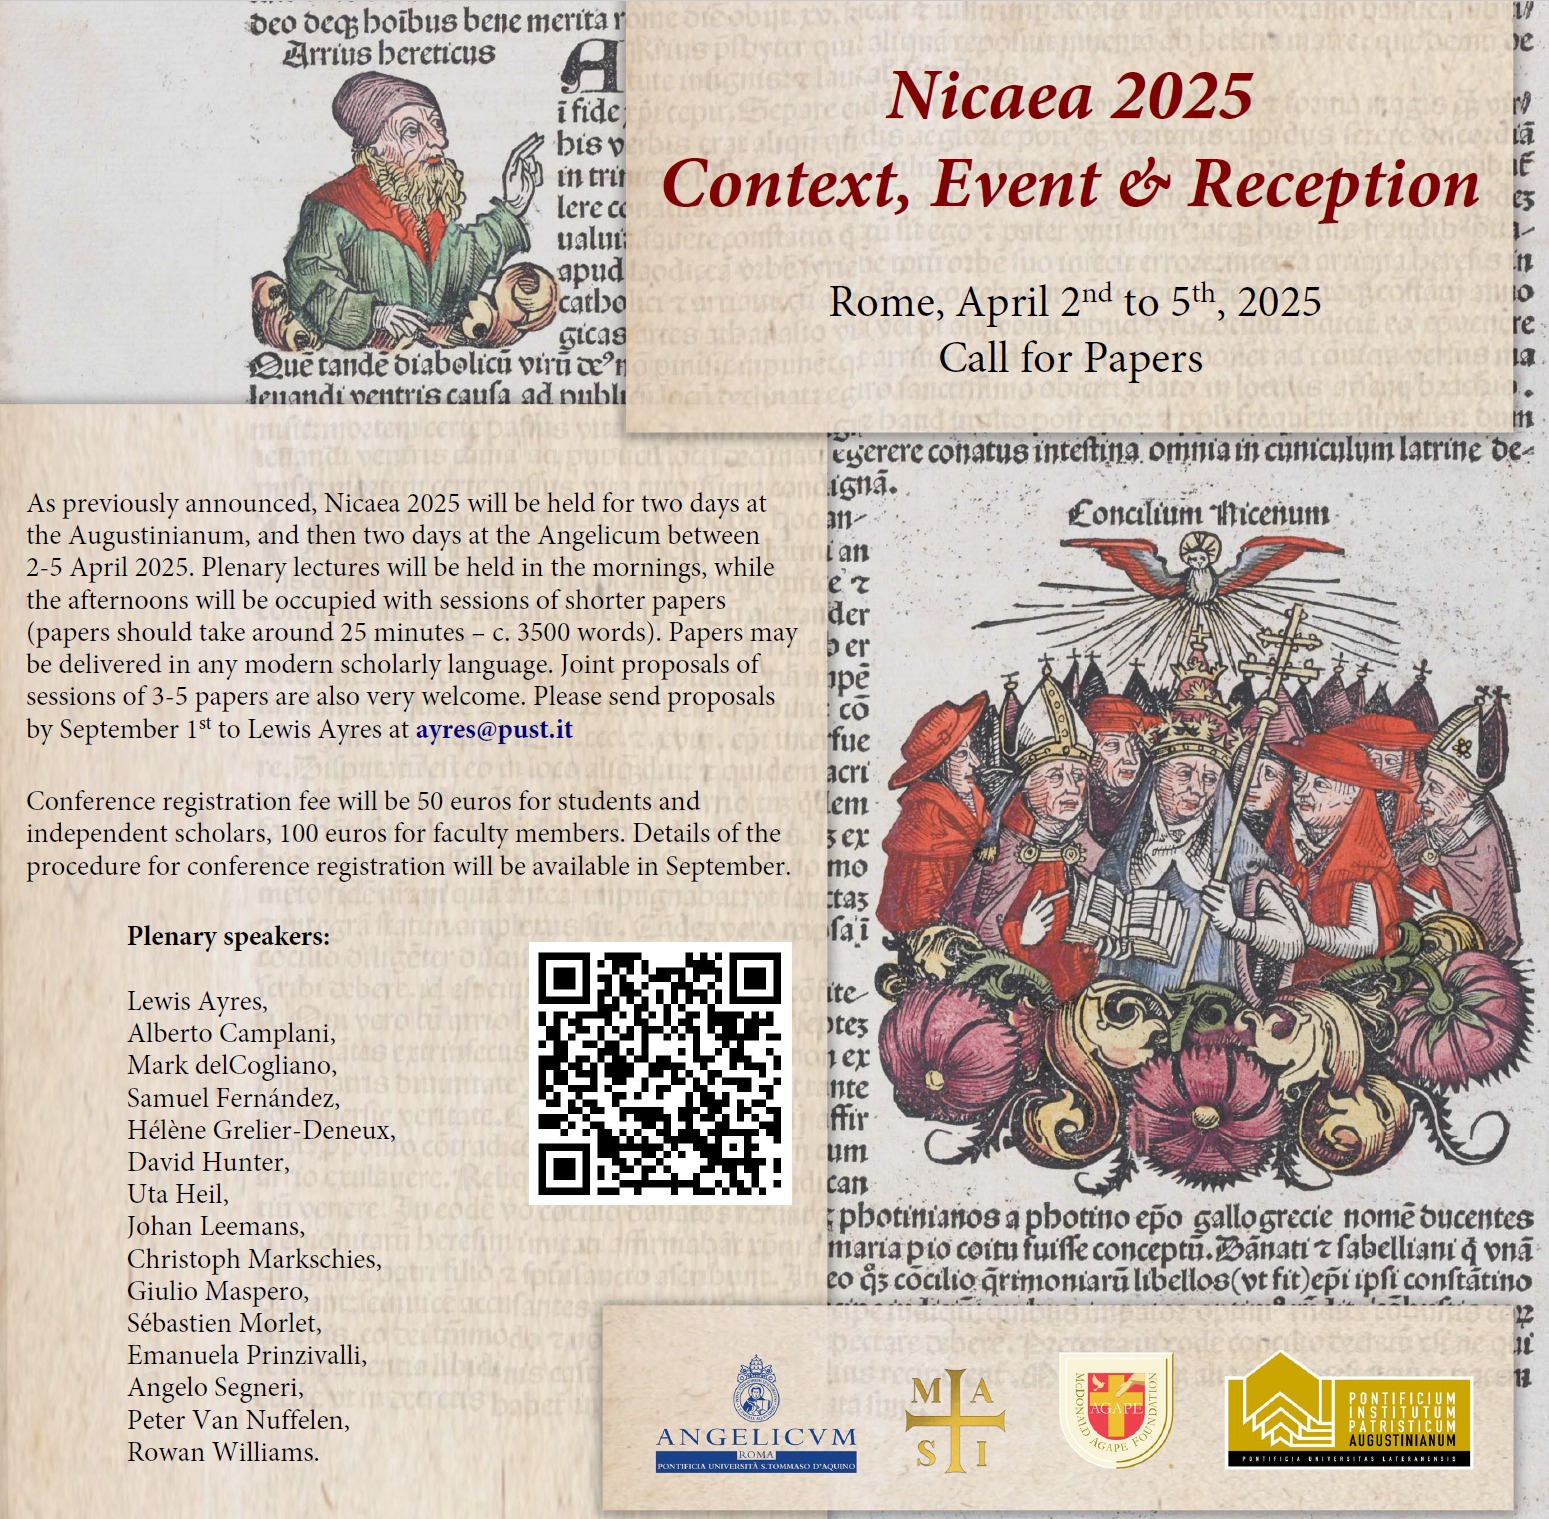 CFP: Conference on the 1700th Anniversary of the Council of Nicaea